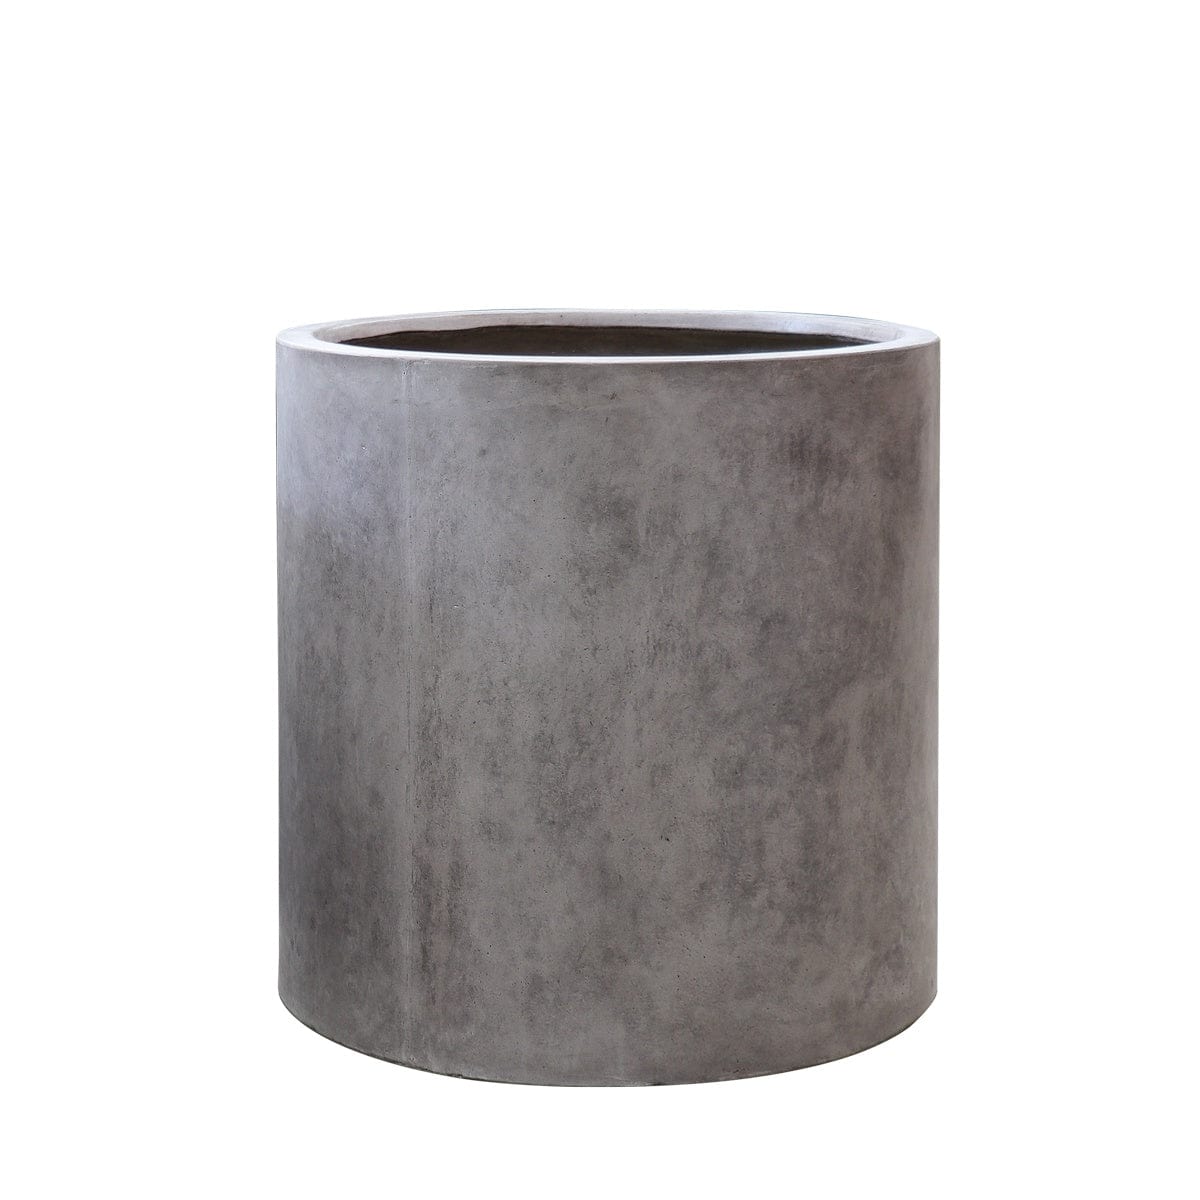 Mikonui Cylinder Planter Medium - Weathered Cement PRE ORDER Little & Fox